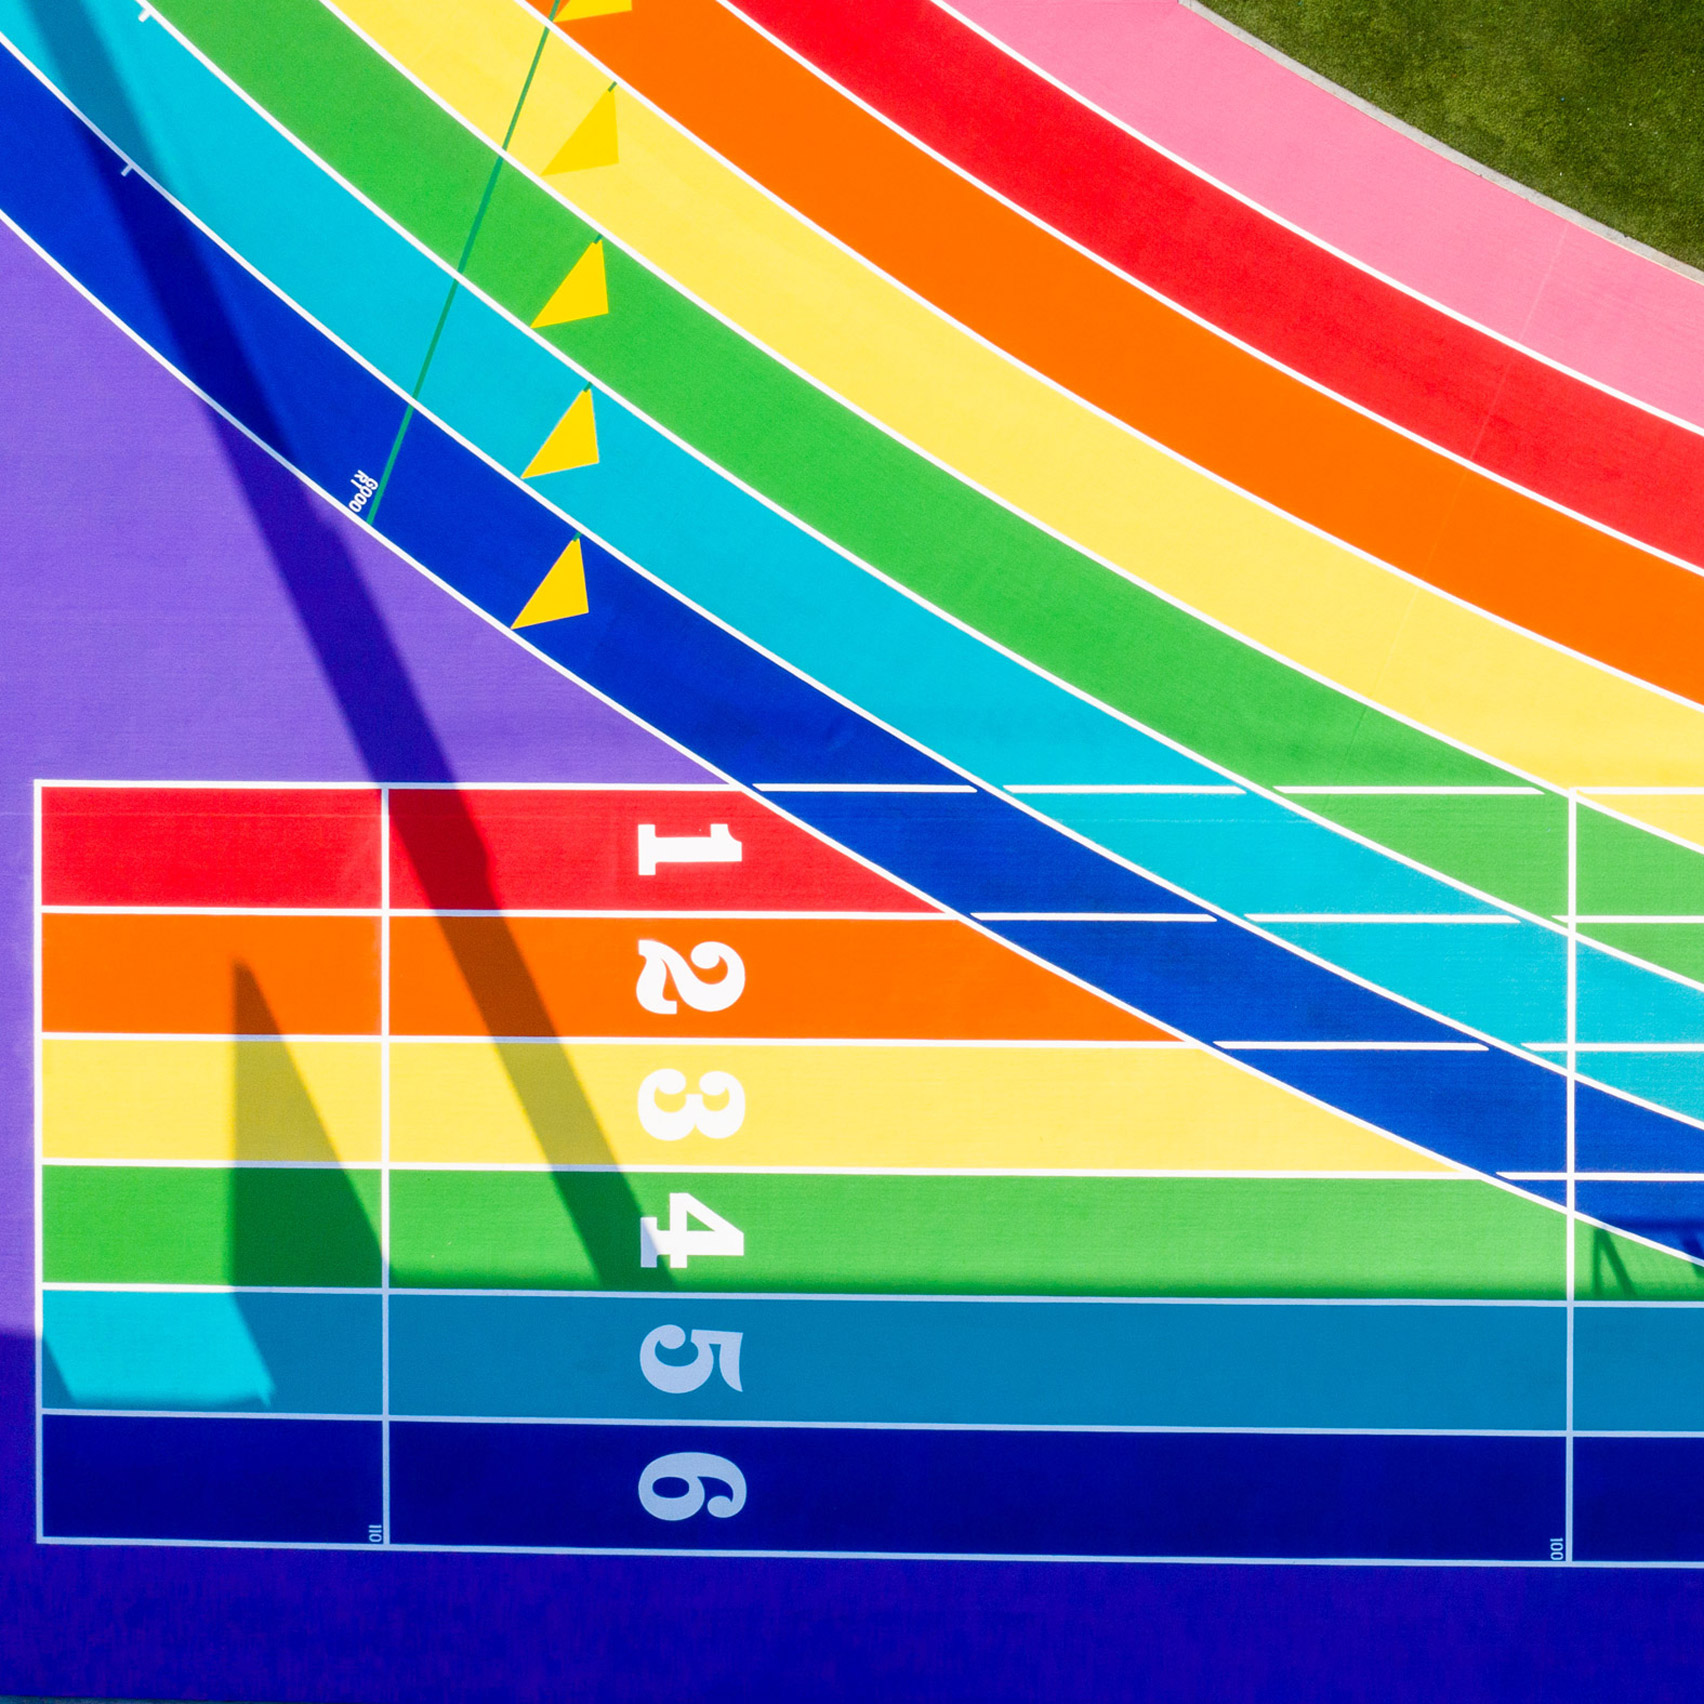 Opschudding Snooze Maak avondeten Nike paints Los Angeles running track in pride flag colours